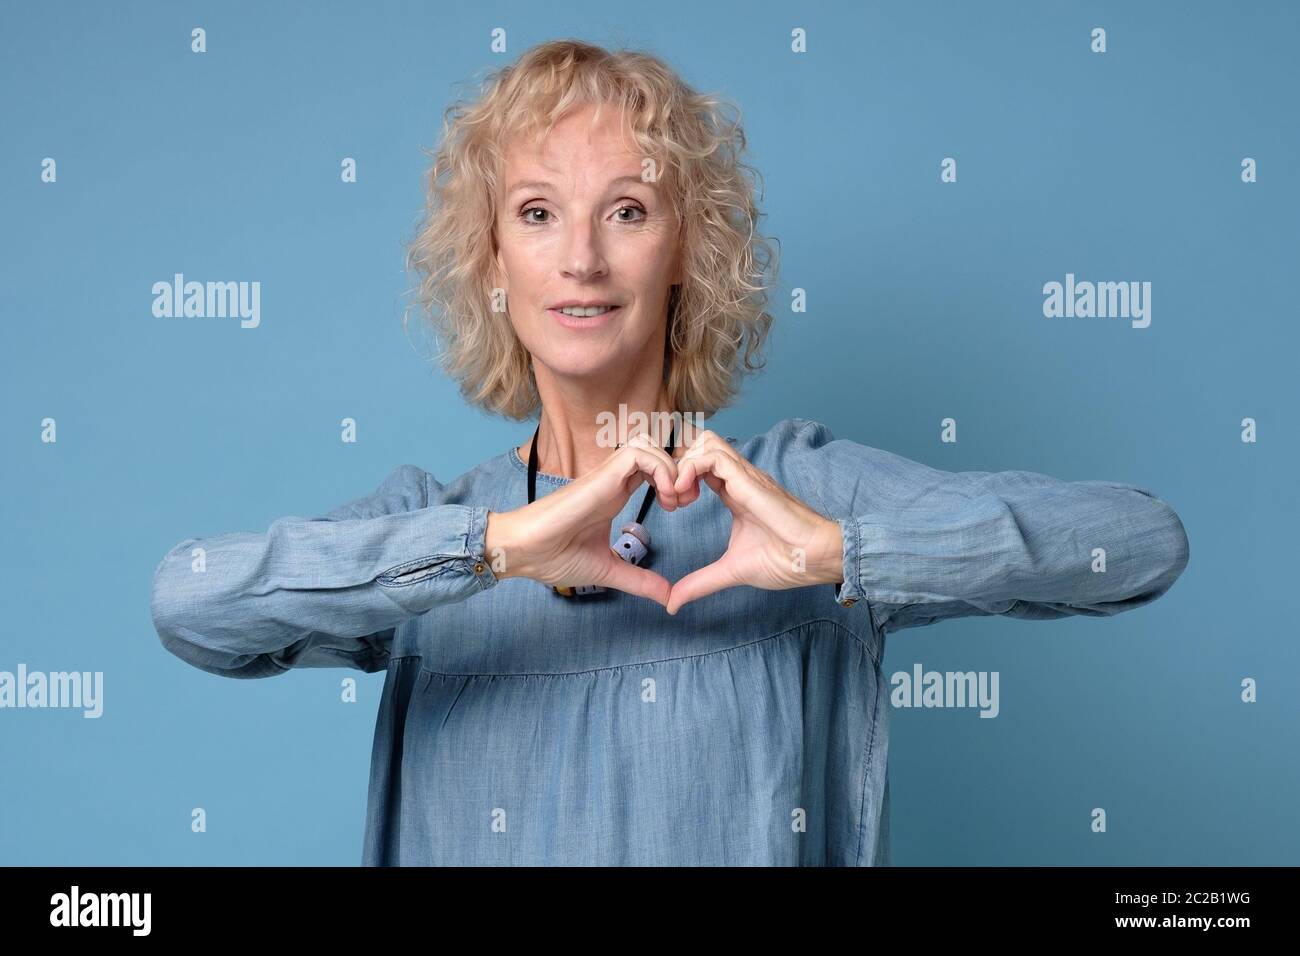 Mature caucasian womna making a heart symbol with her hands Stock Photo